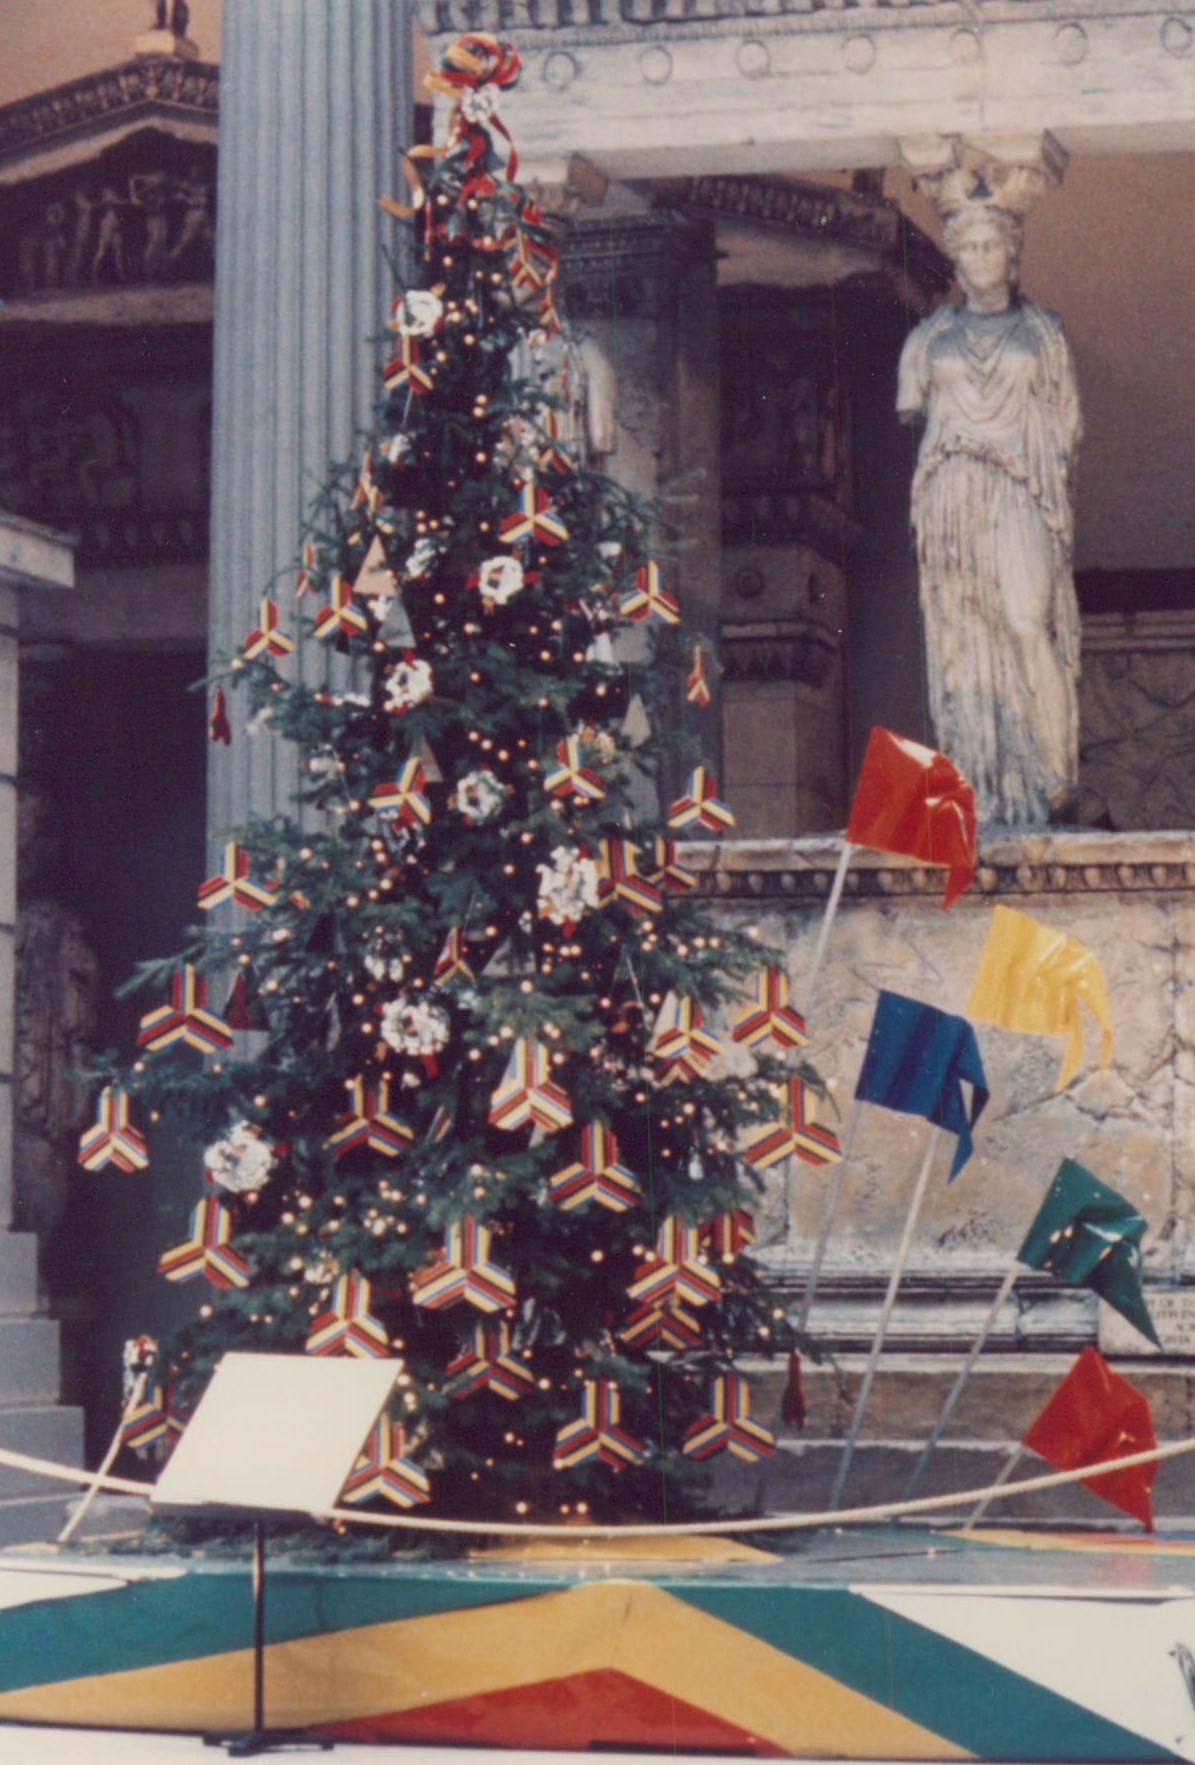 A colorful tree in front of a statue.